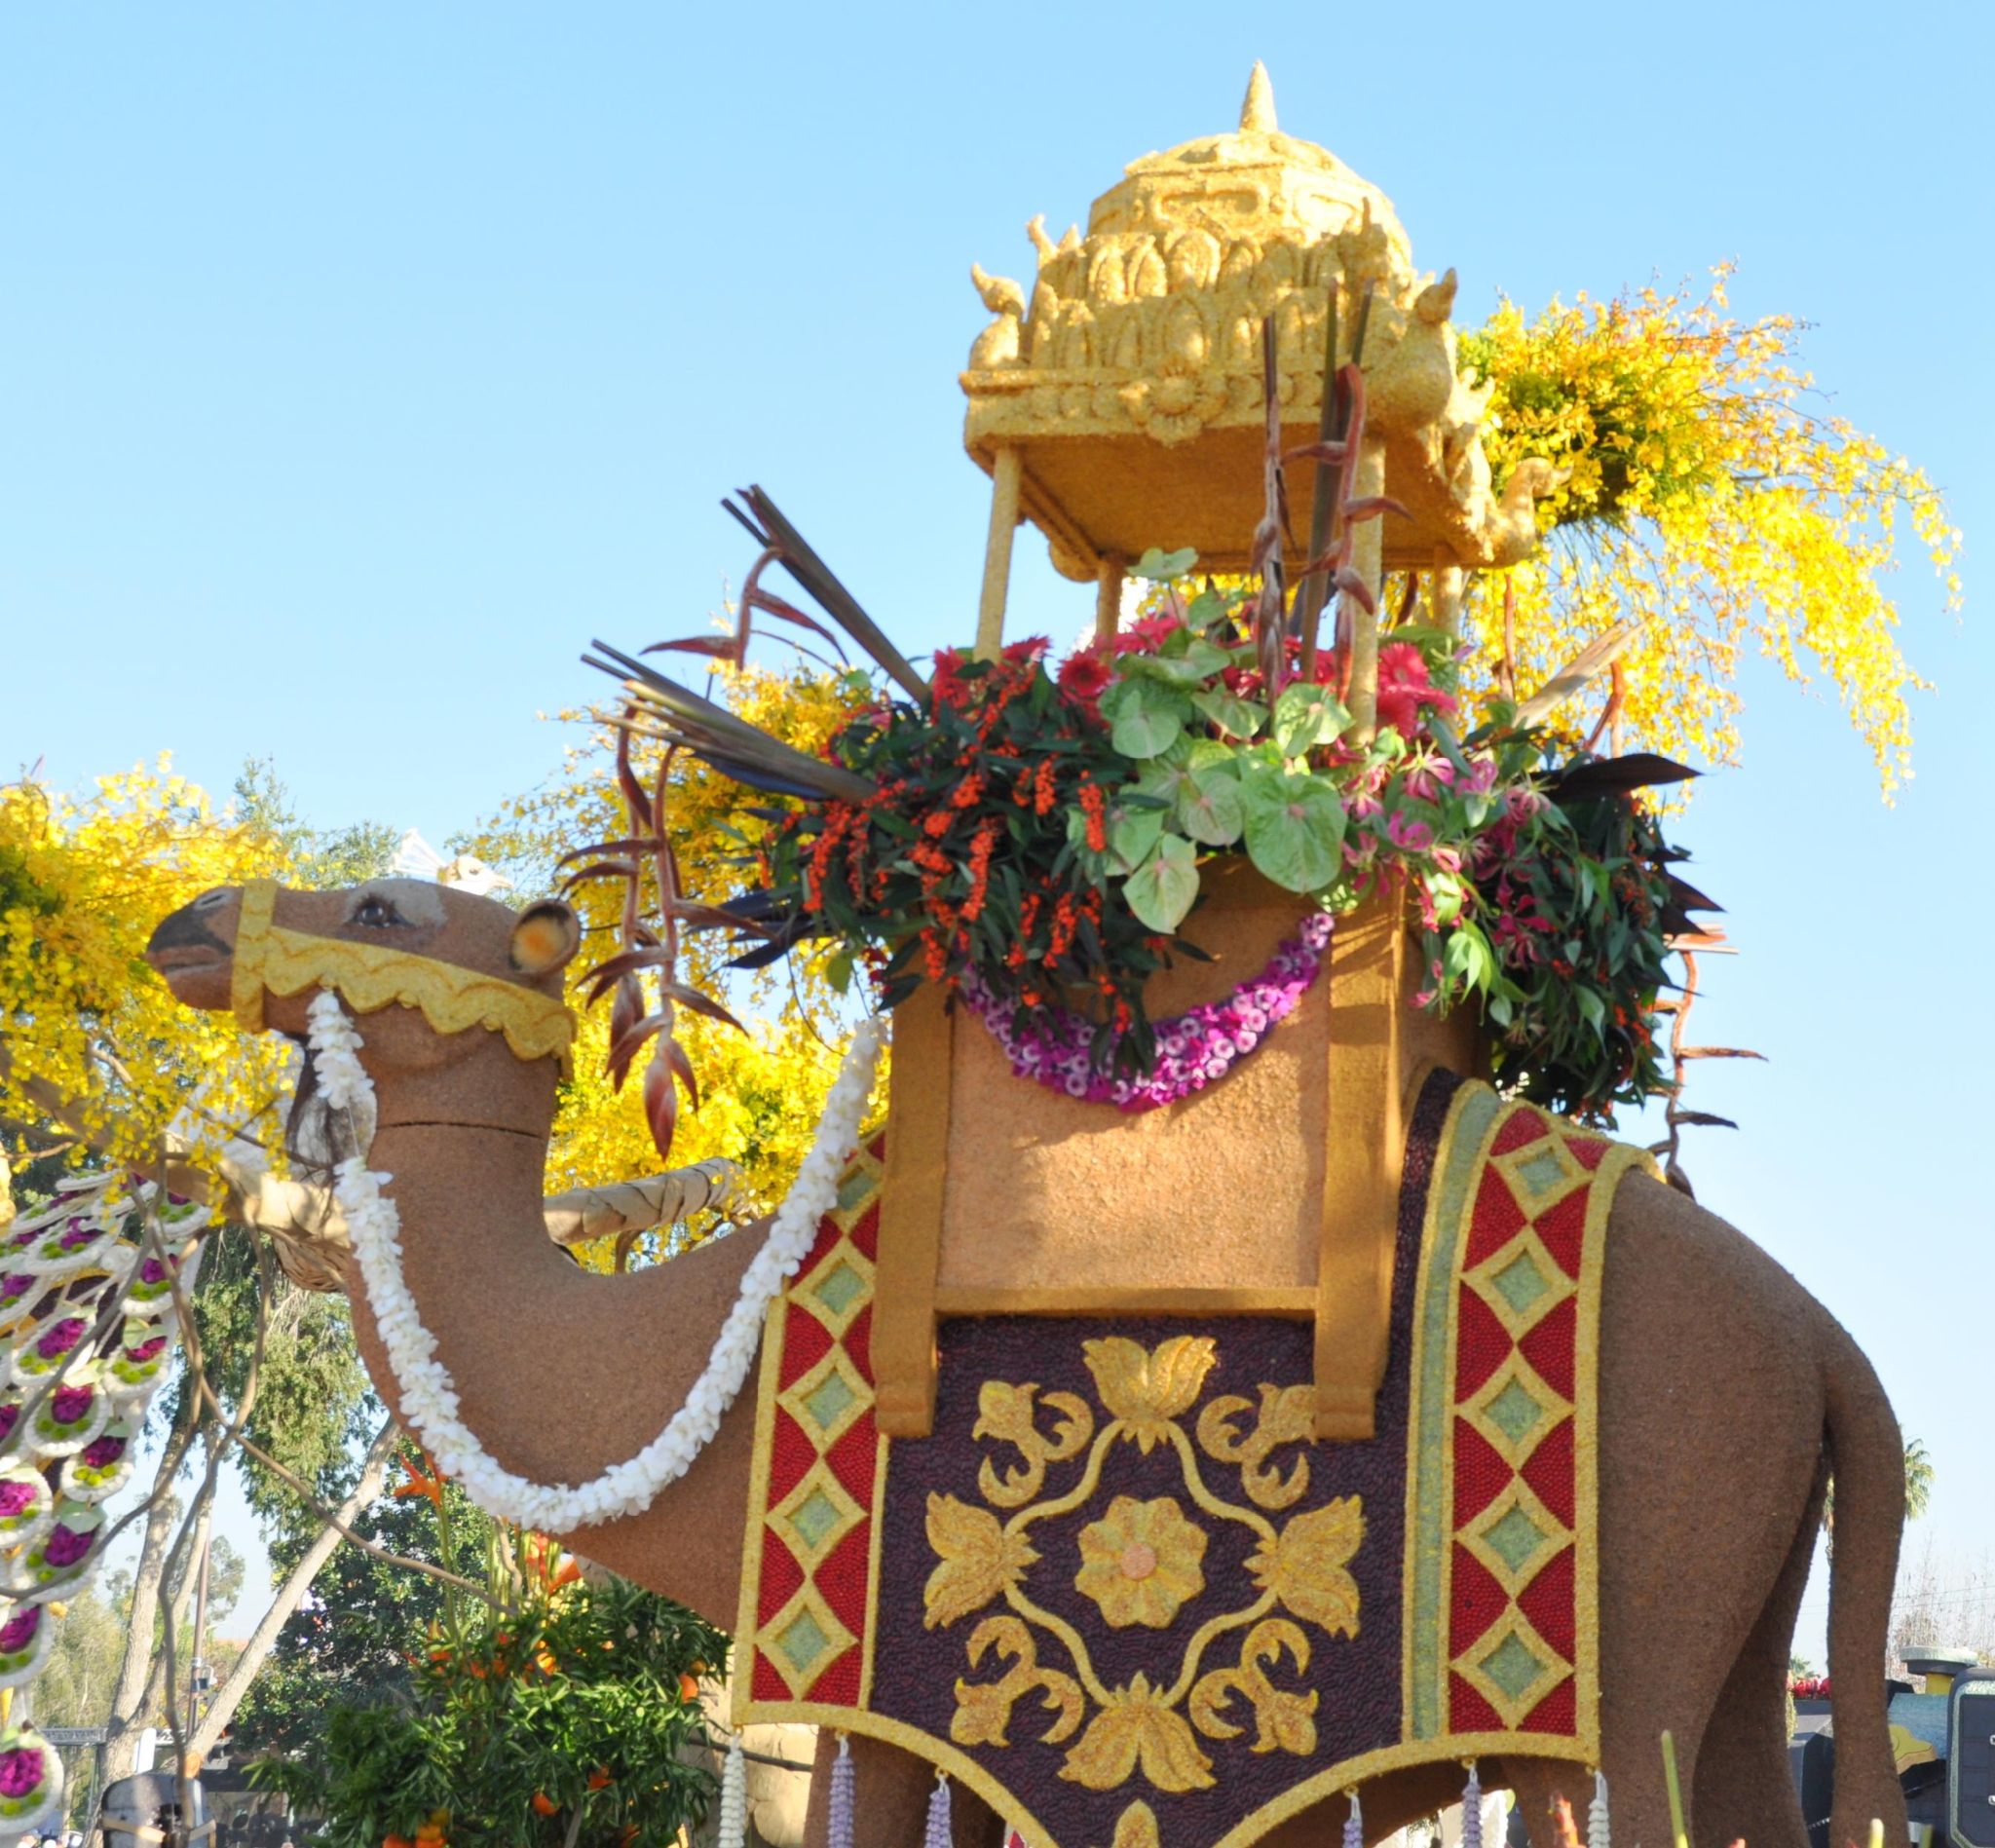 Dole Packaged Foods - Sunrise at the Oasis (h), Tournament of Roses Parade Showcase, Pasadena, CA - 2014-01-01